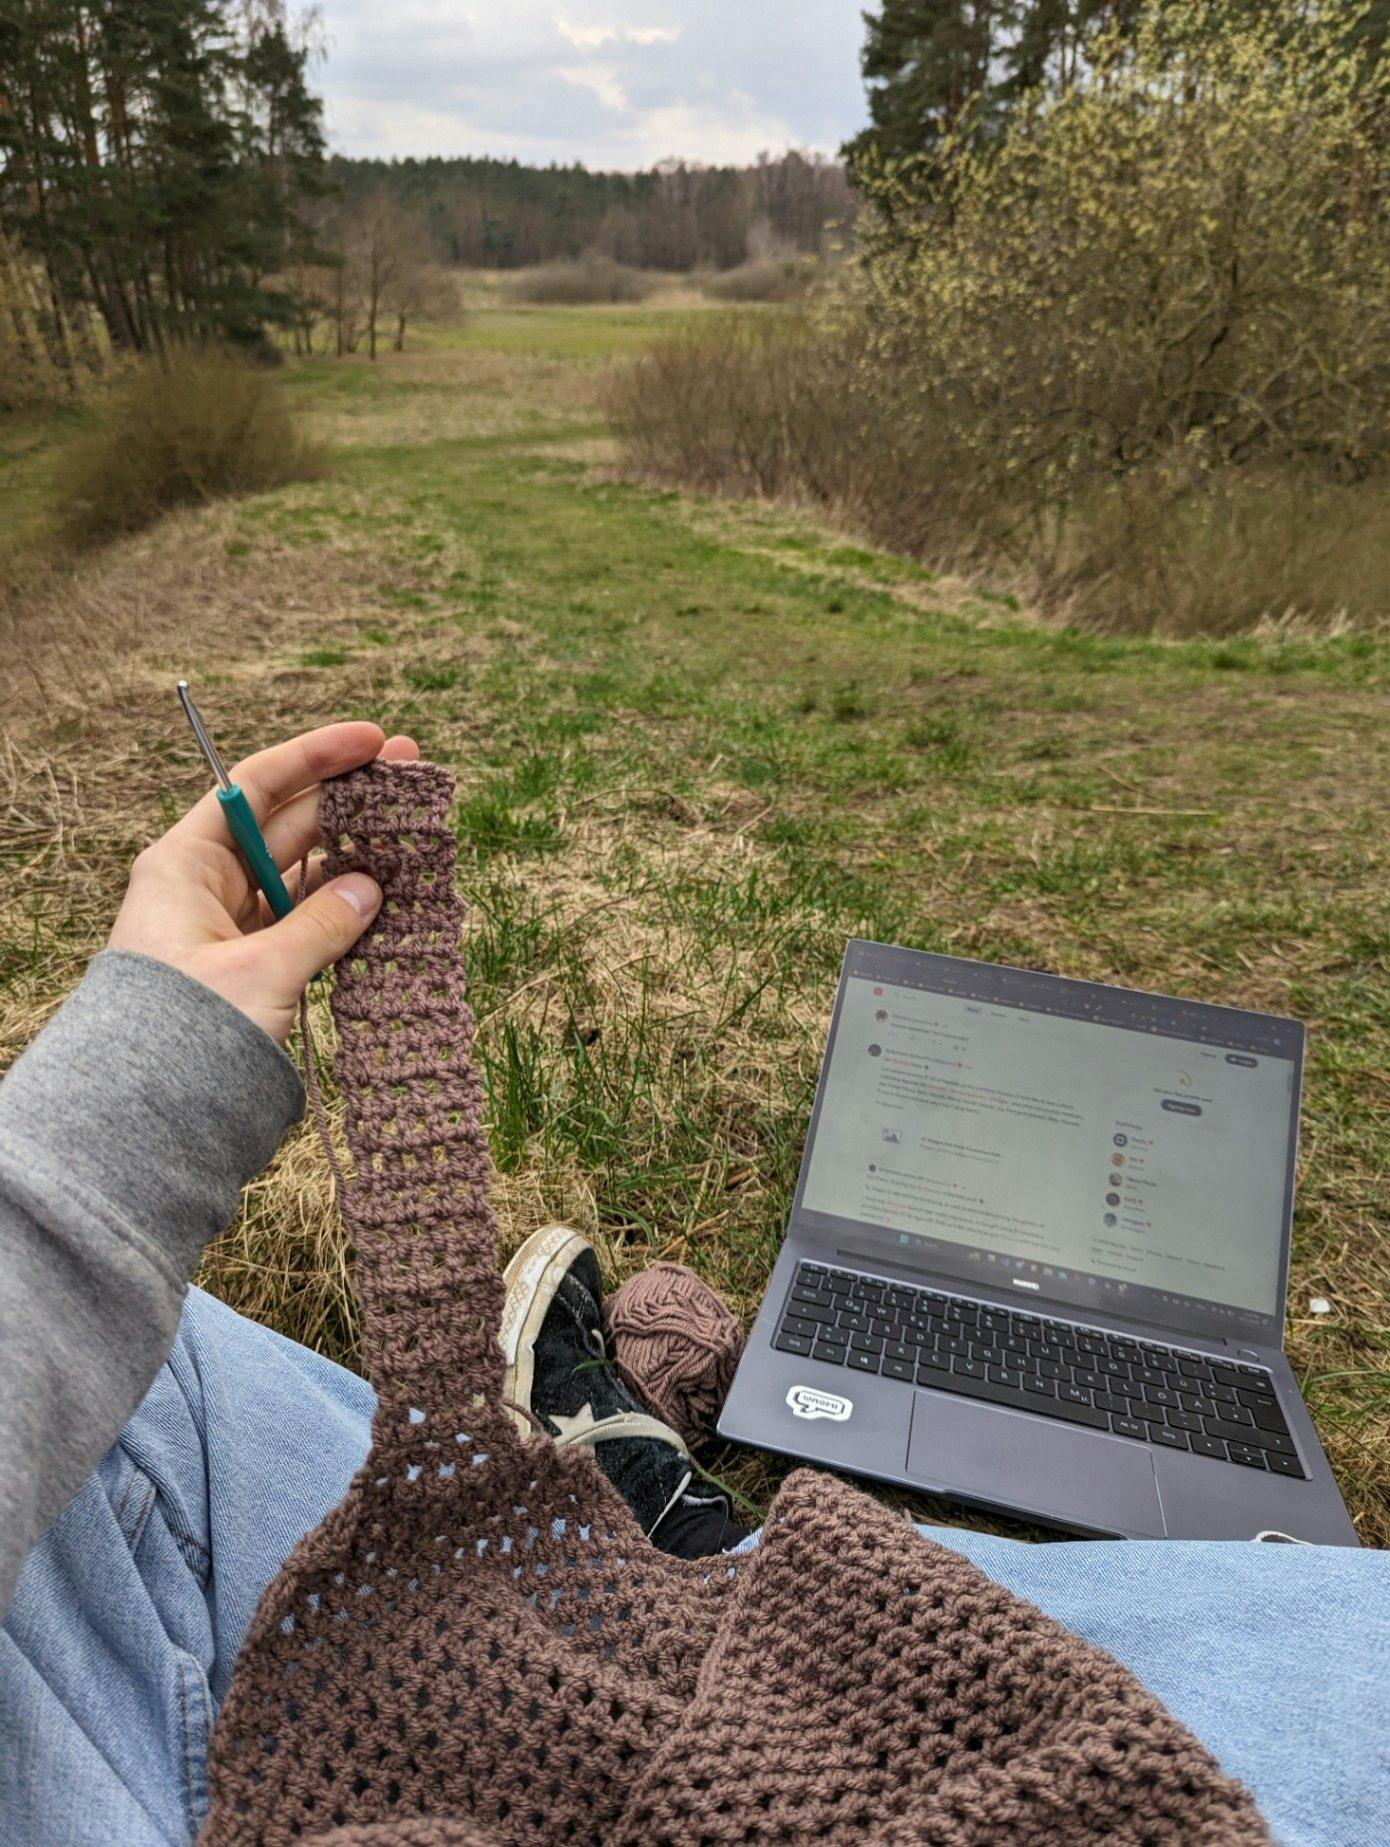 crocheting in nature